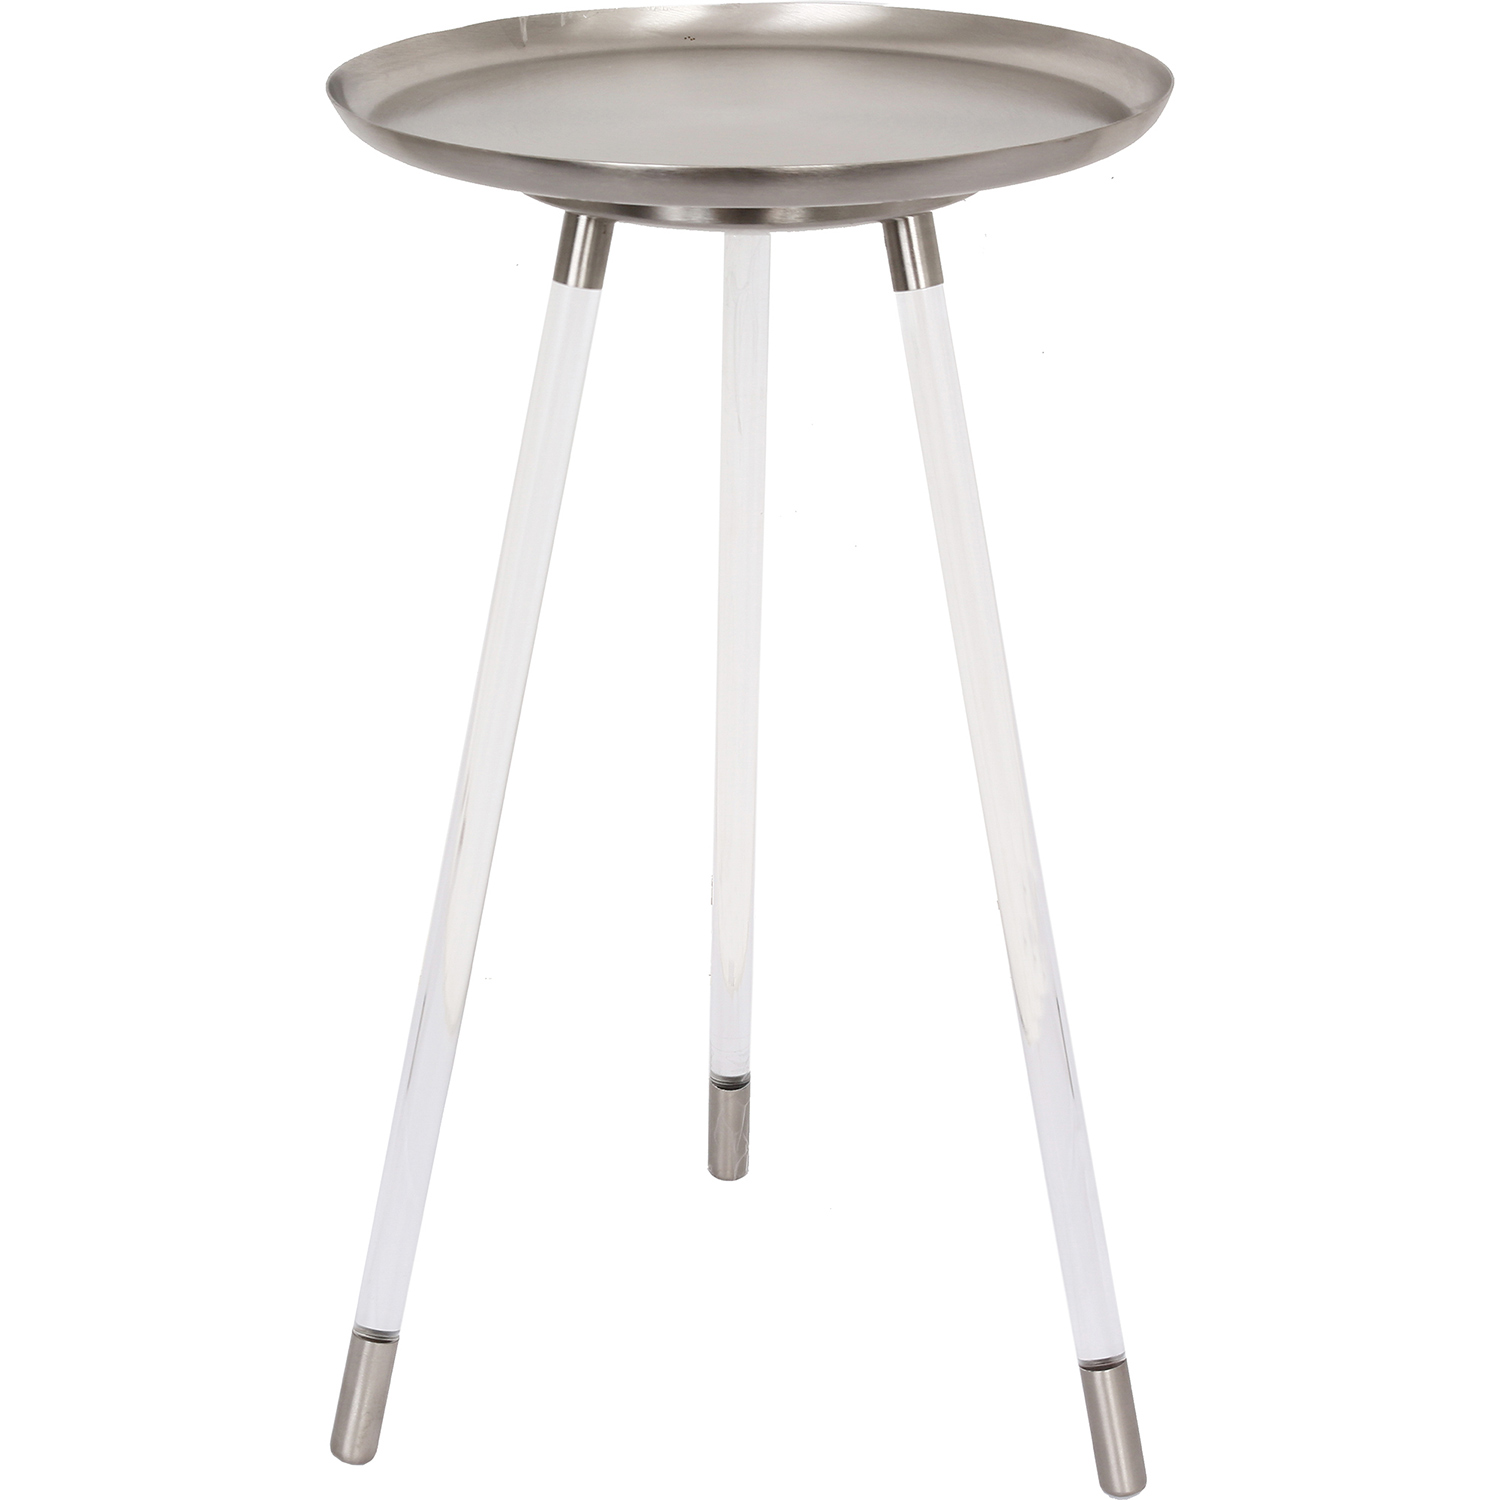 Ren-Wil Radbourne Accent Table - Pewter/Clear